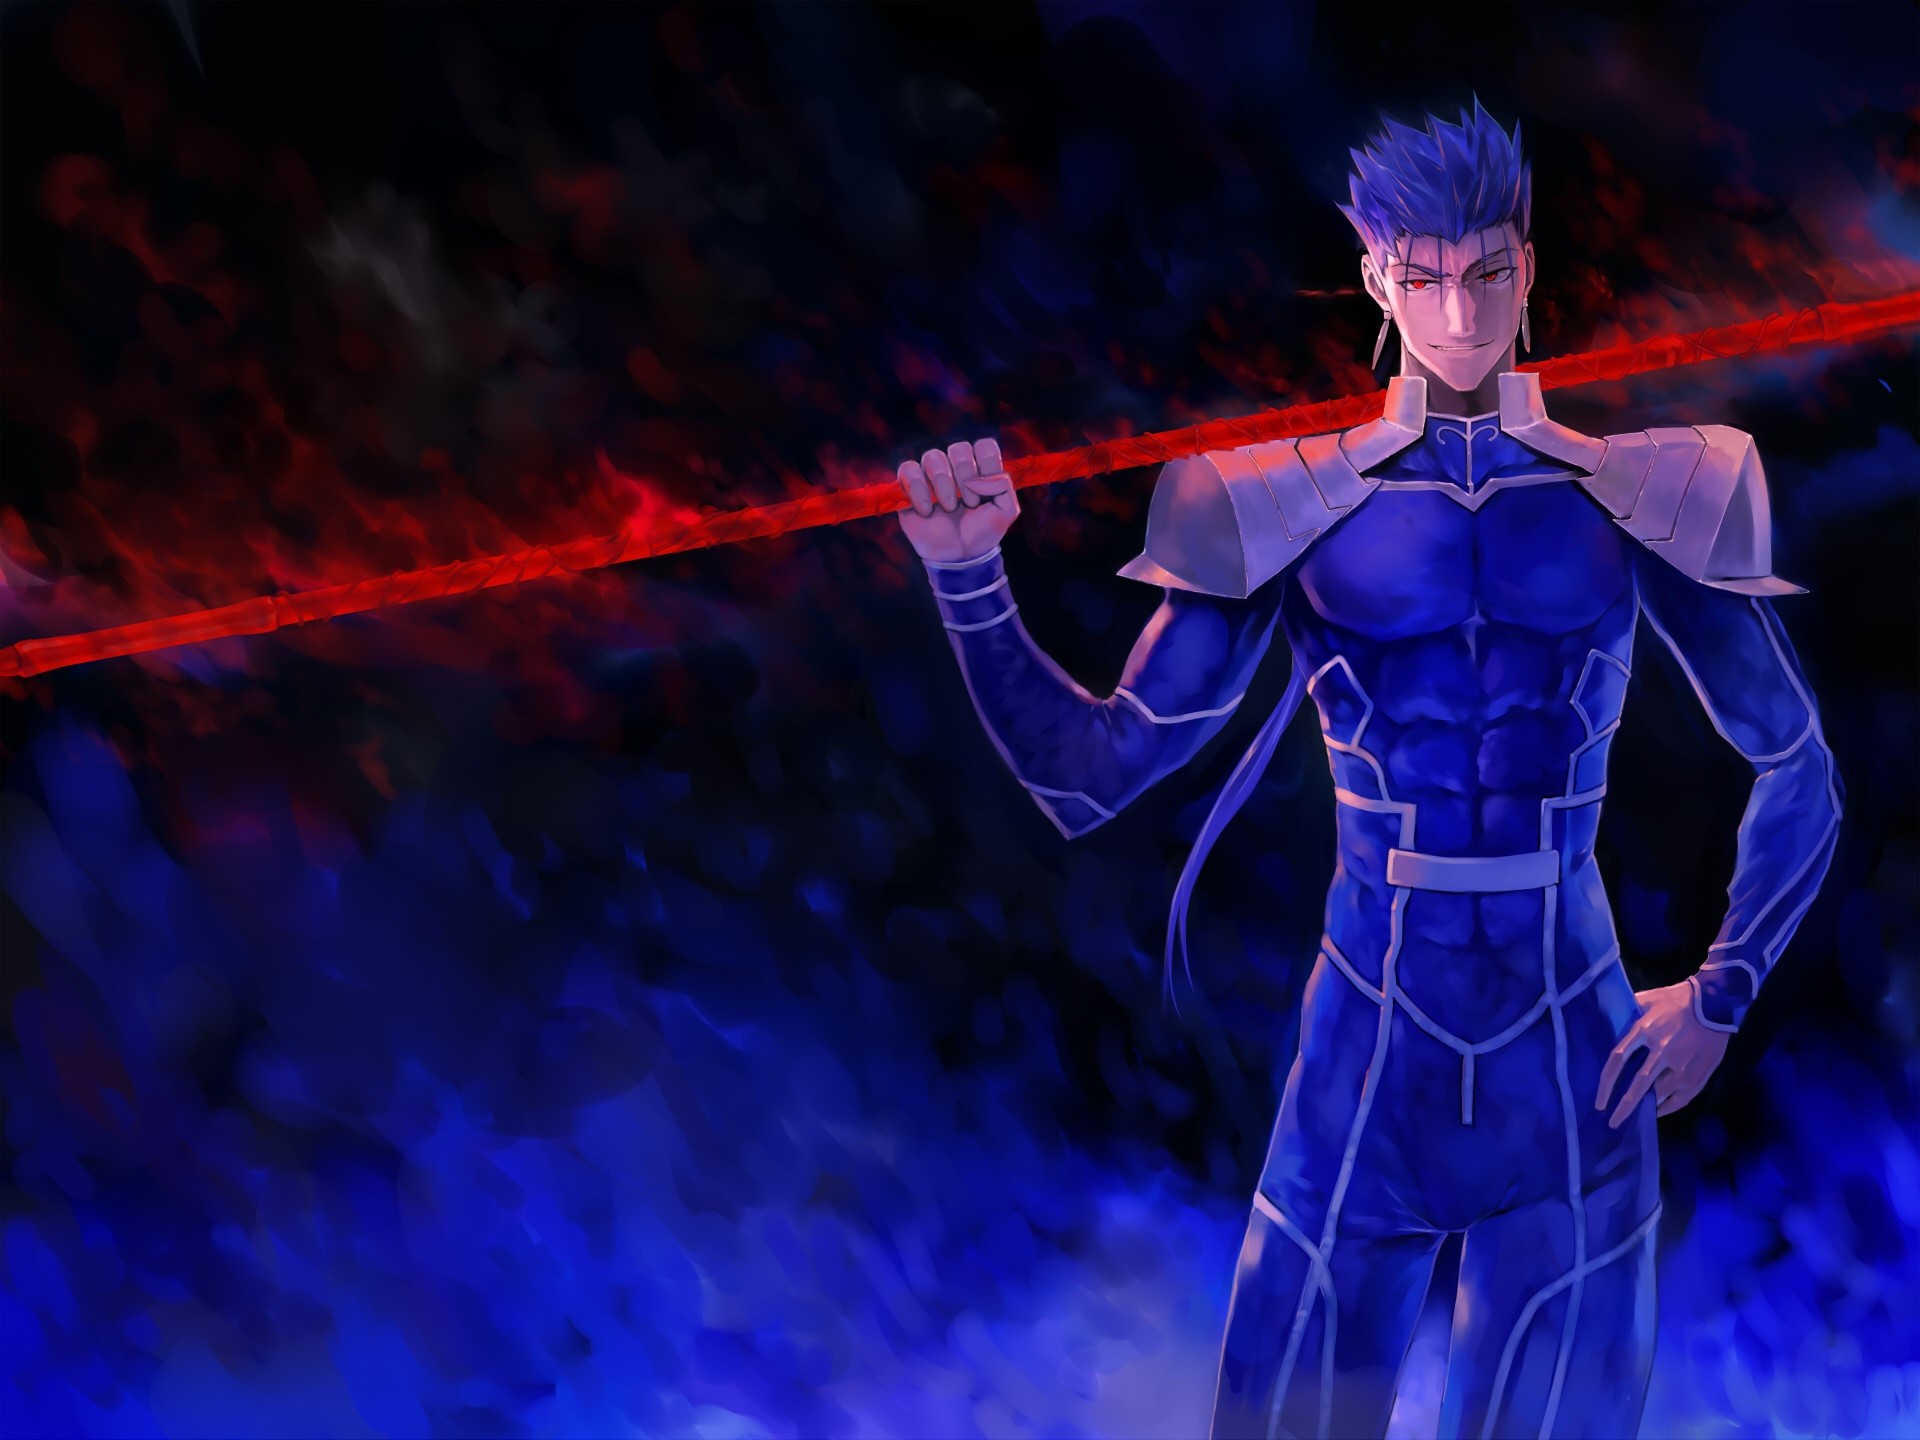 1920x1440 Fate/stay night, Fate/stay night: Unlimited Blade Works, Fate/